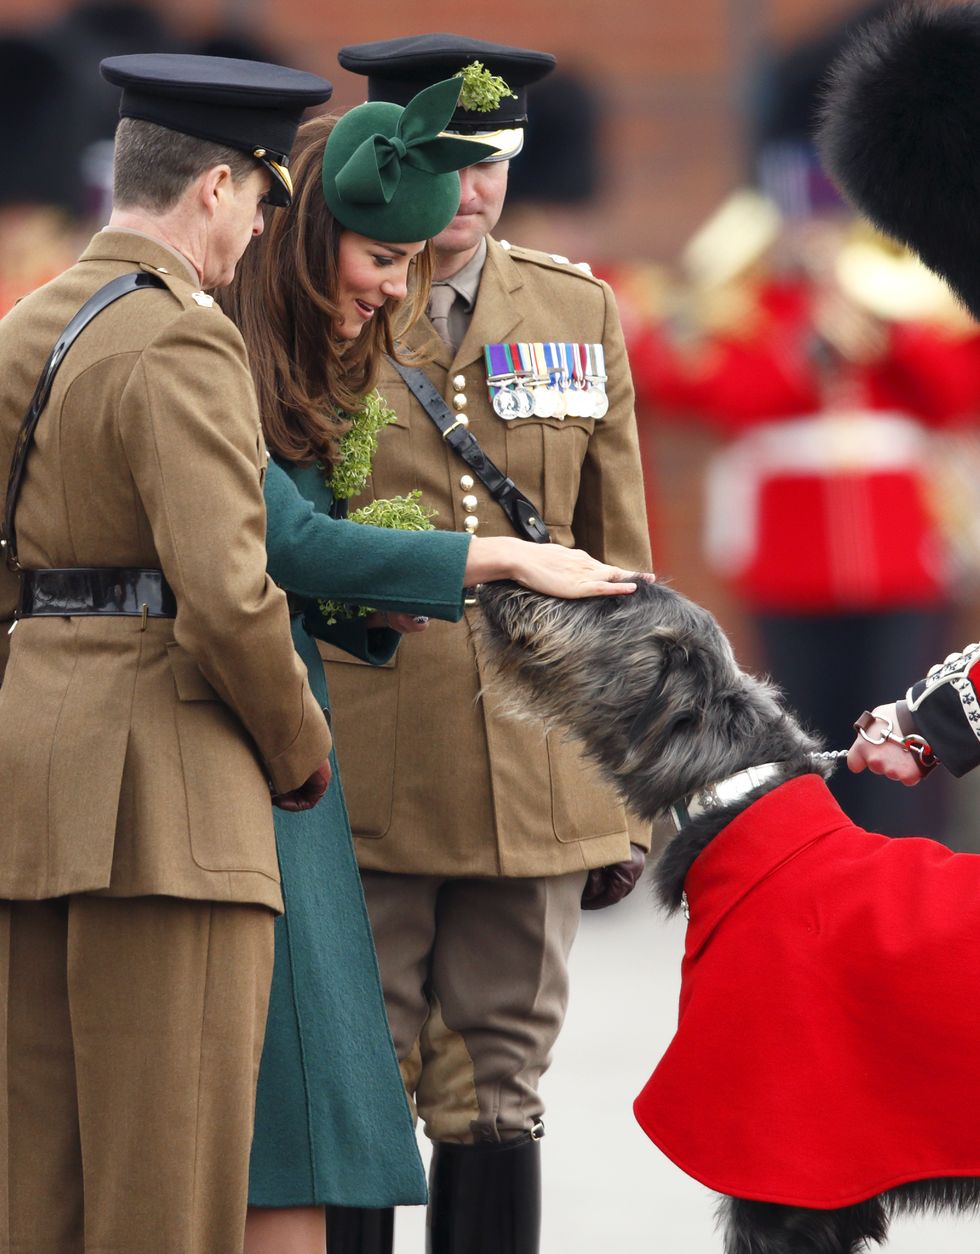 <p>Petting her good friend&nbsp;Domhnall<span class="redactor-invisible-space" data-verified="redactor" data-redactor-tag="span" data-redactor-class="redactor-invisible-space"> during the&nbsp;annual St Patrick's Day Parade&nbsp;in Aldershot, England.<span class="redactor-invisible-space" data-verified="redactor" data-redactor-tag="span" data-redactor-class="redactor-invisible-space"></span></span></p>